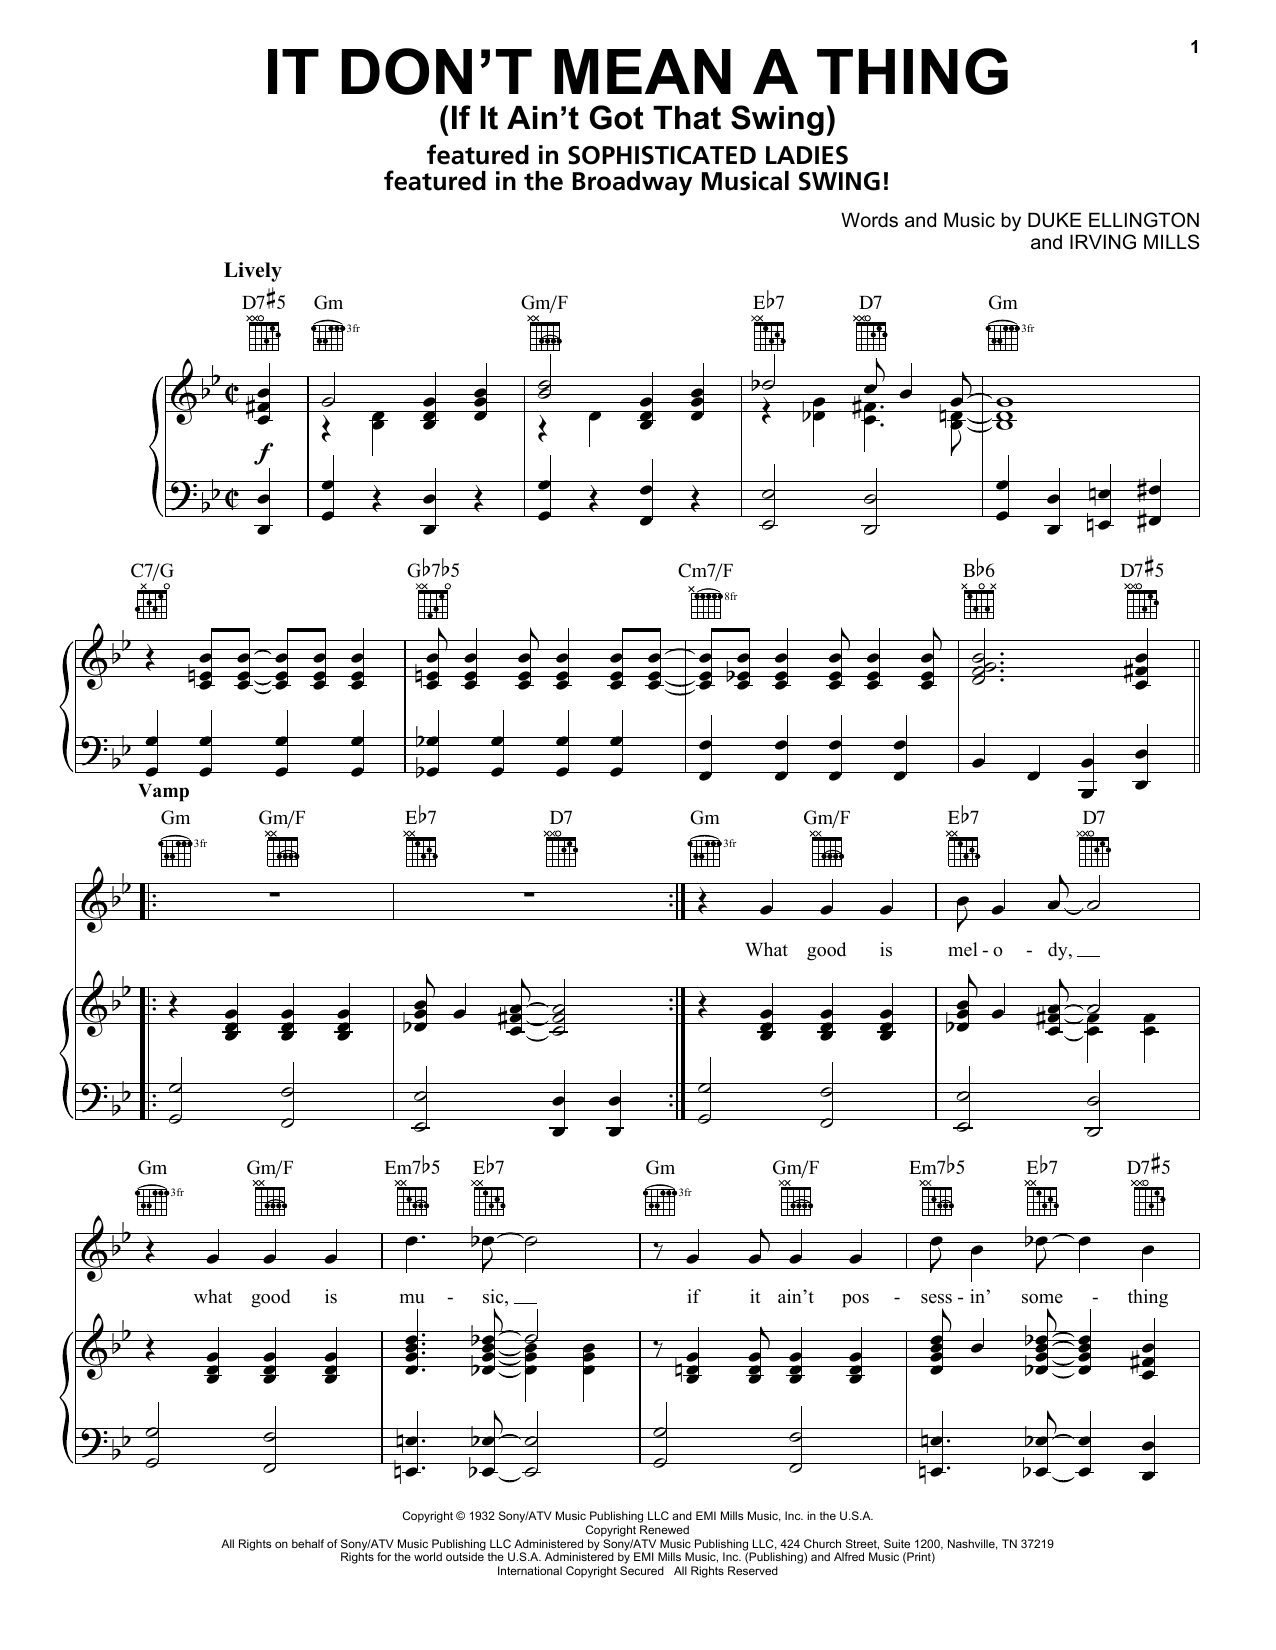 It Don't Mean A Thing (If It Ain't Got That Swing) sheet music